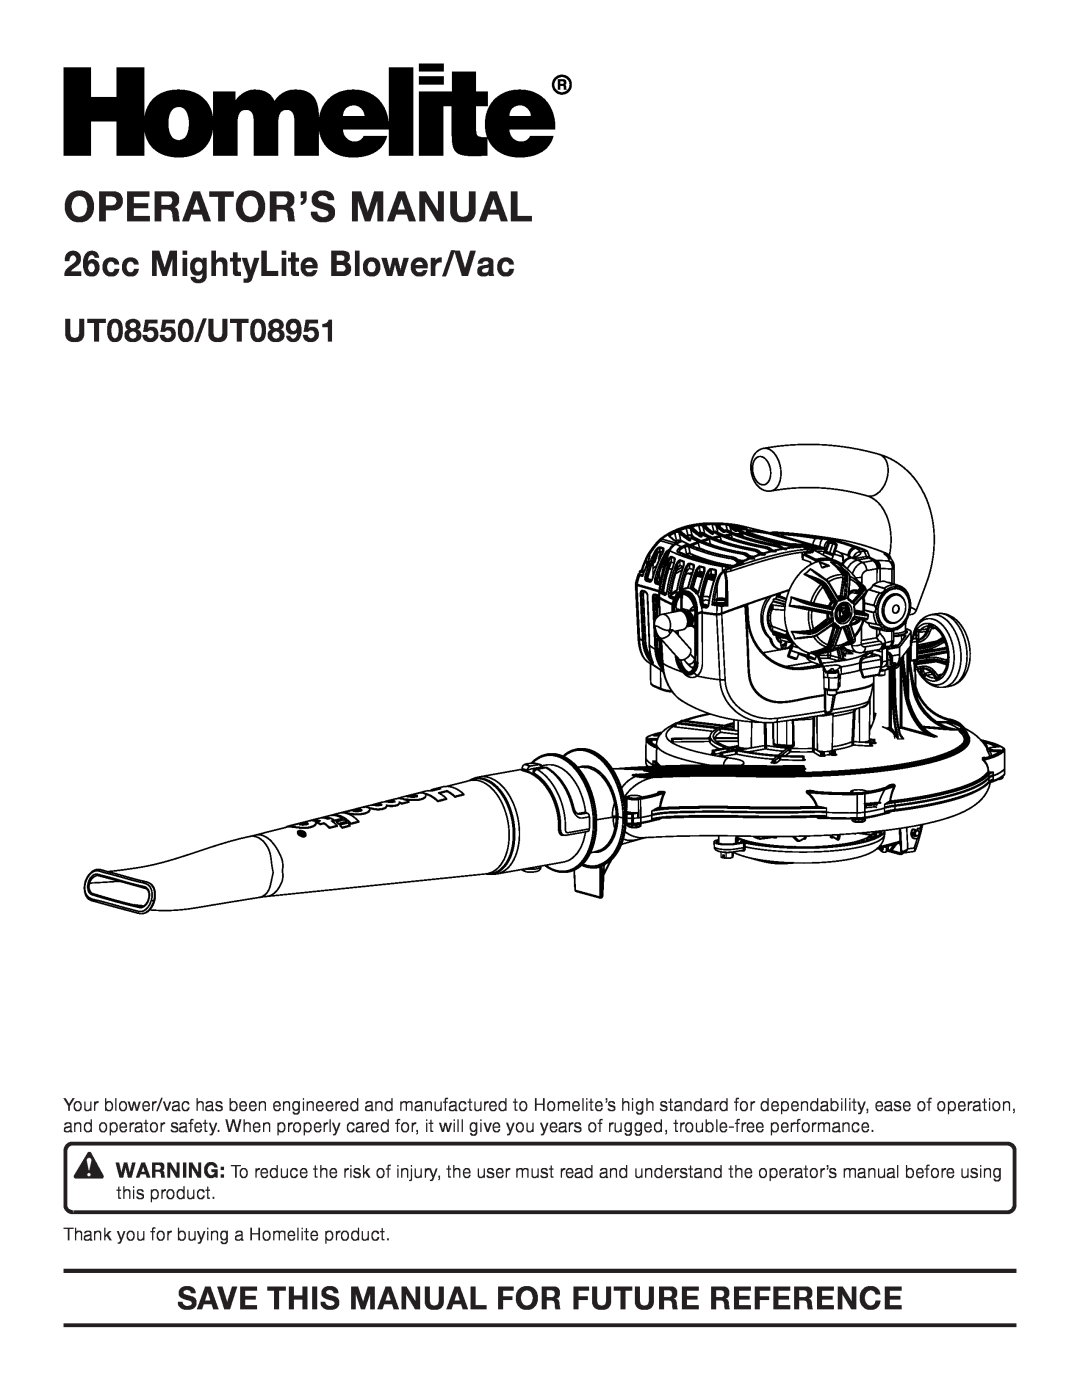 Homelite manual Operator’S Manual, 26cc MightyLite Blower/Vac, UT08550/UT08951, Save This Manual For Future Reference 